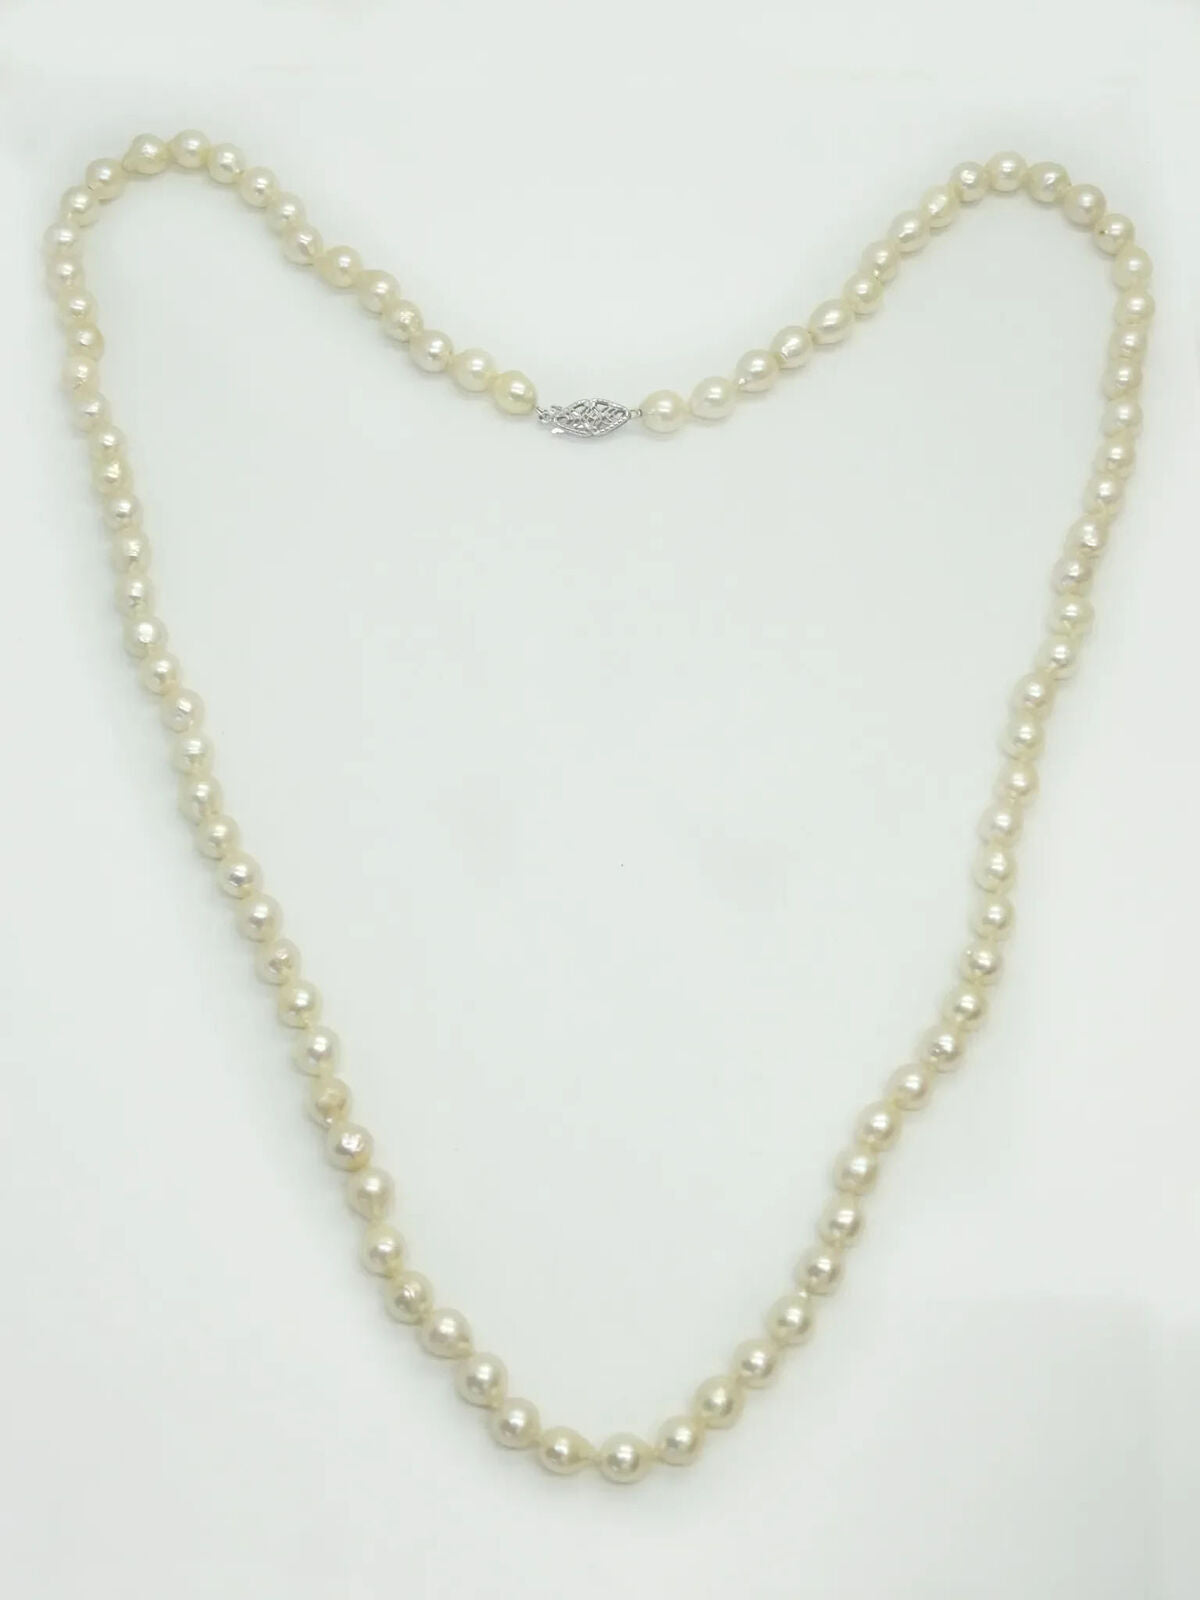 Baroque Pearl Bead Necklace 30" Long with 14k White Gold Clasp